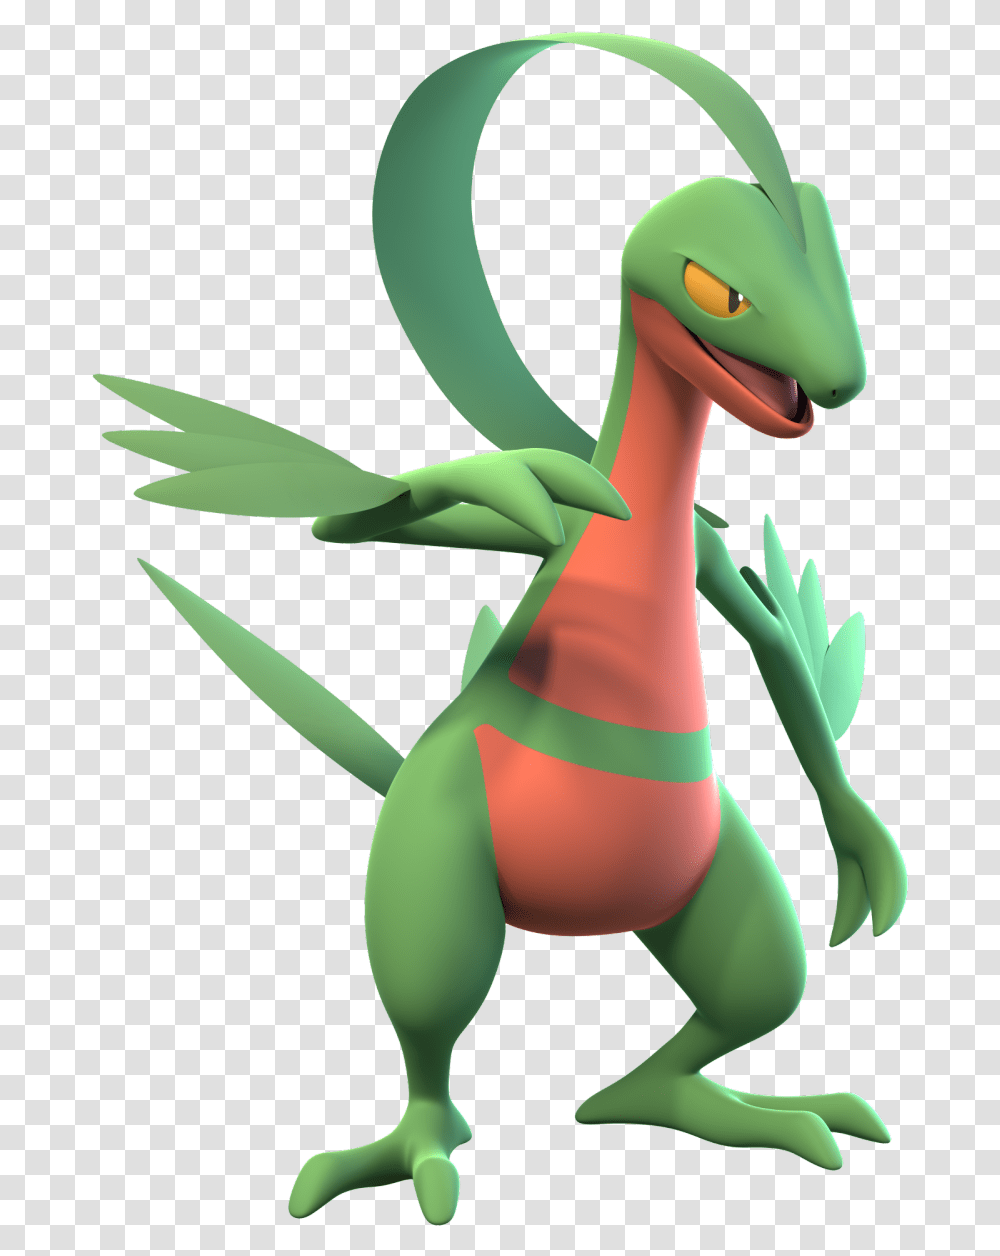 It's A Pretty Minor Change But The Eyes Were Bothering Grovyle Pokemon 3d, Toy, Dinosaur, Reptile, Animal Transparent Png